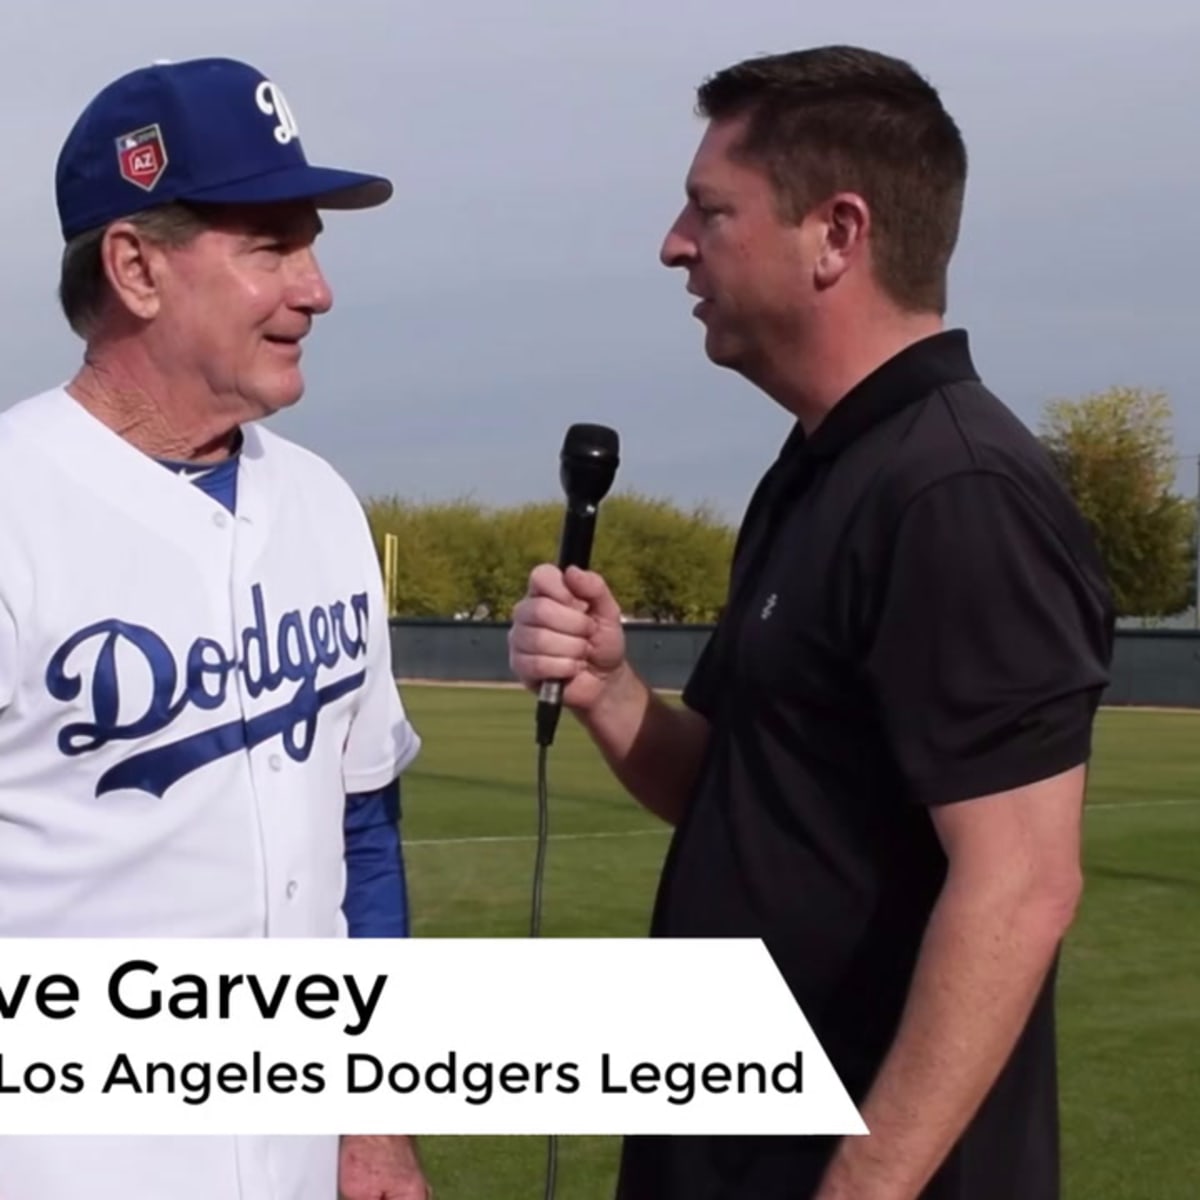 Steve Garvey - Here's another look at the stance! Have a great